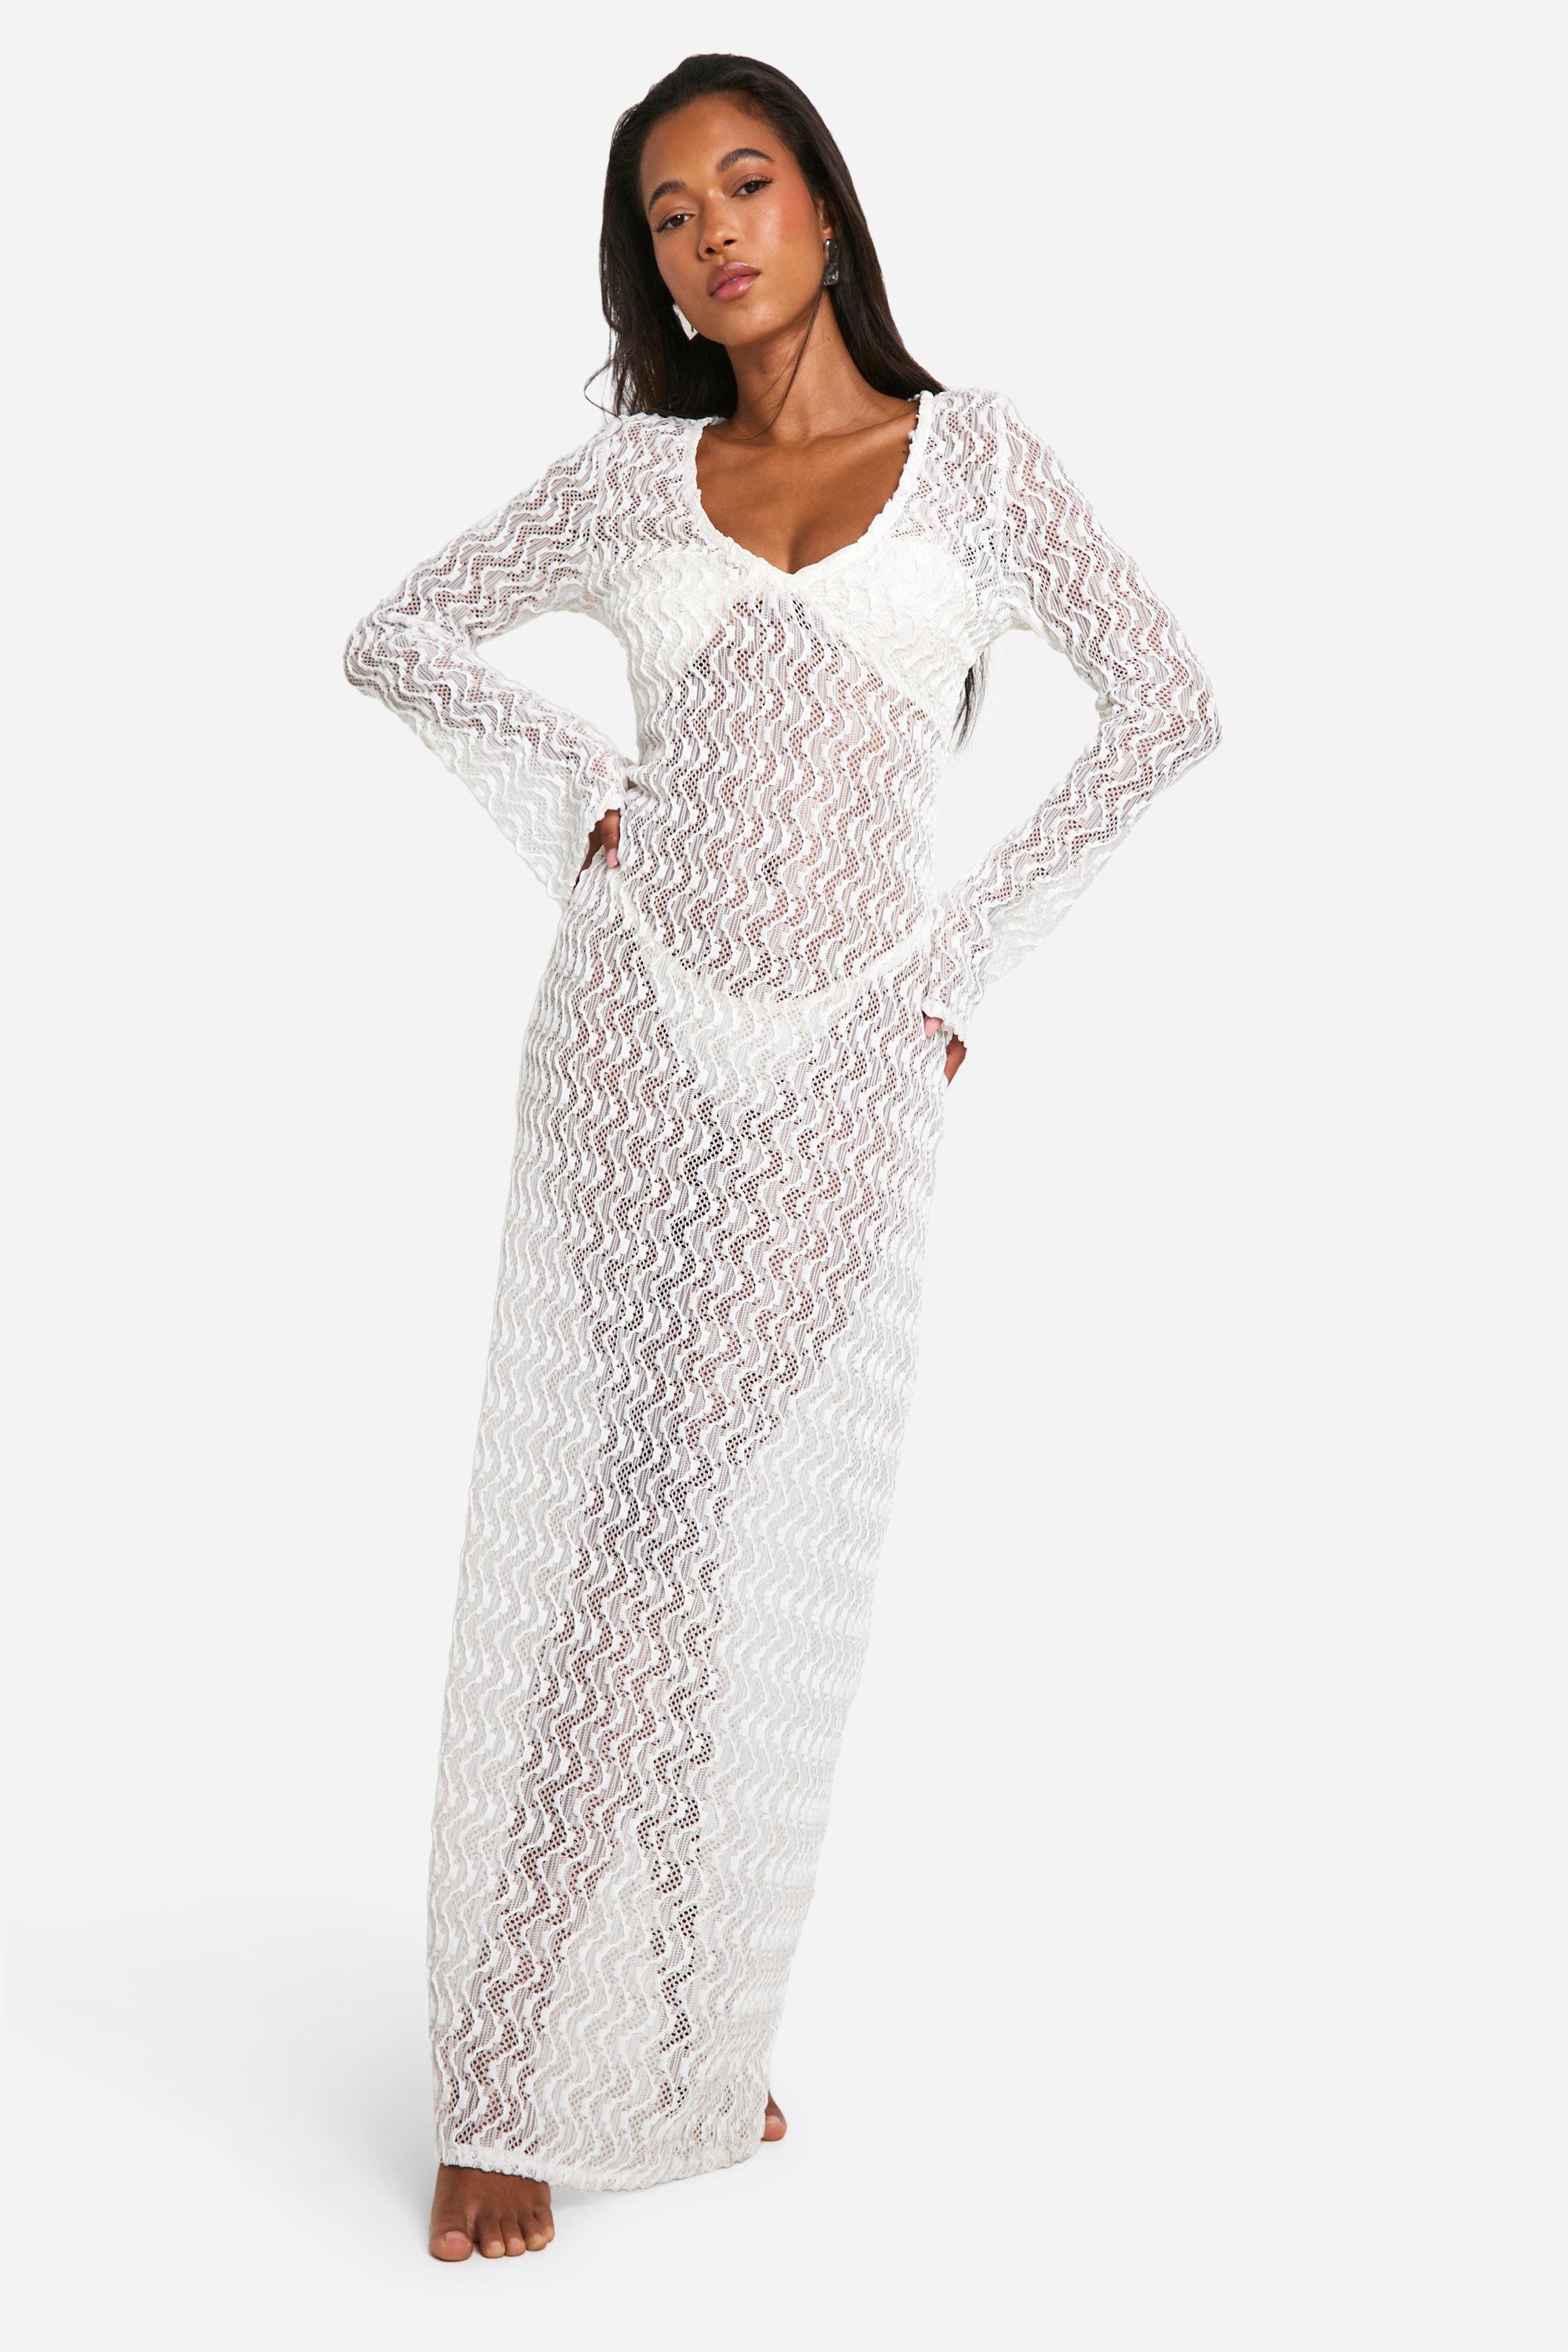 Boohoo Textured Lace Beach Maxi Cover-Up Dress, White